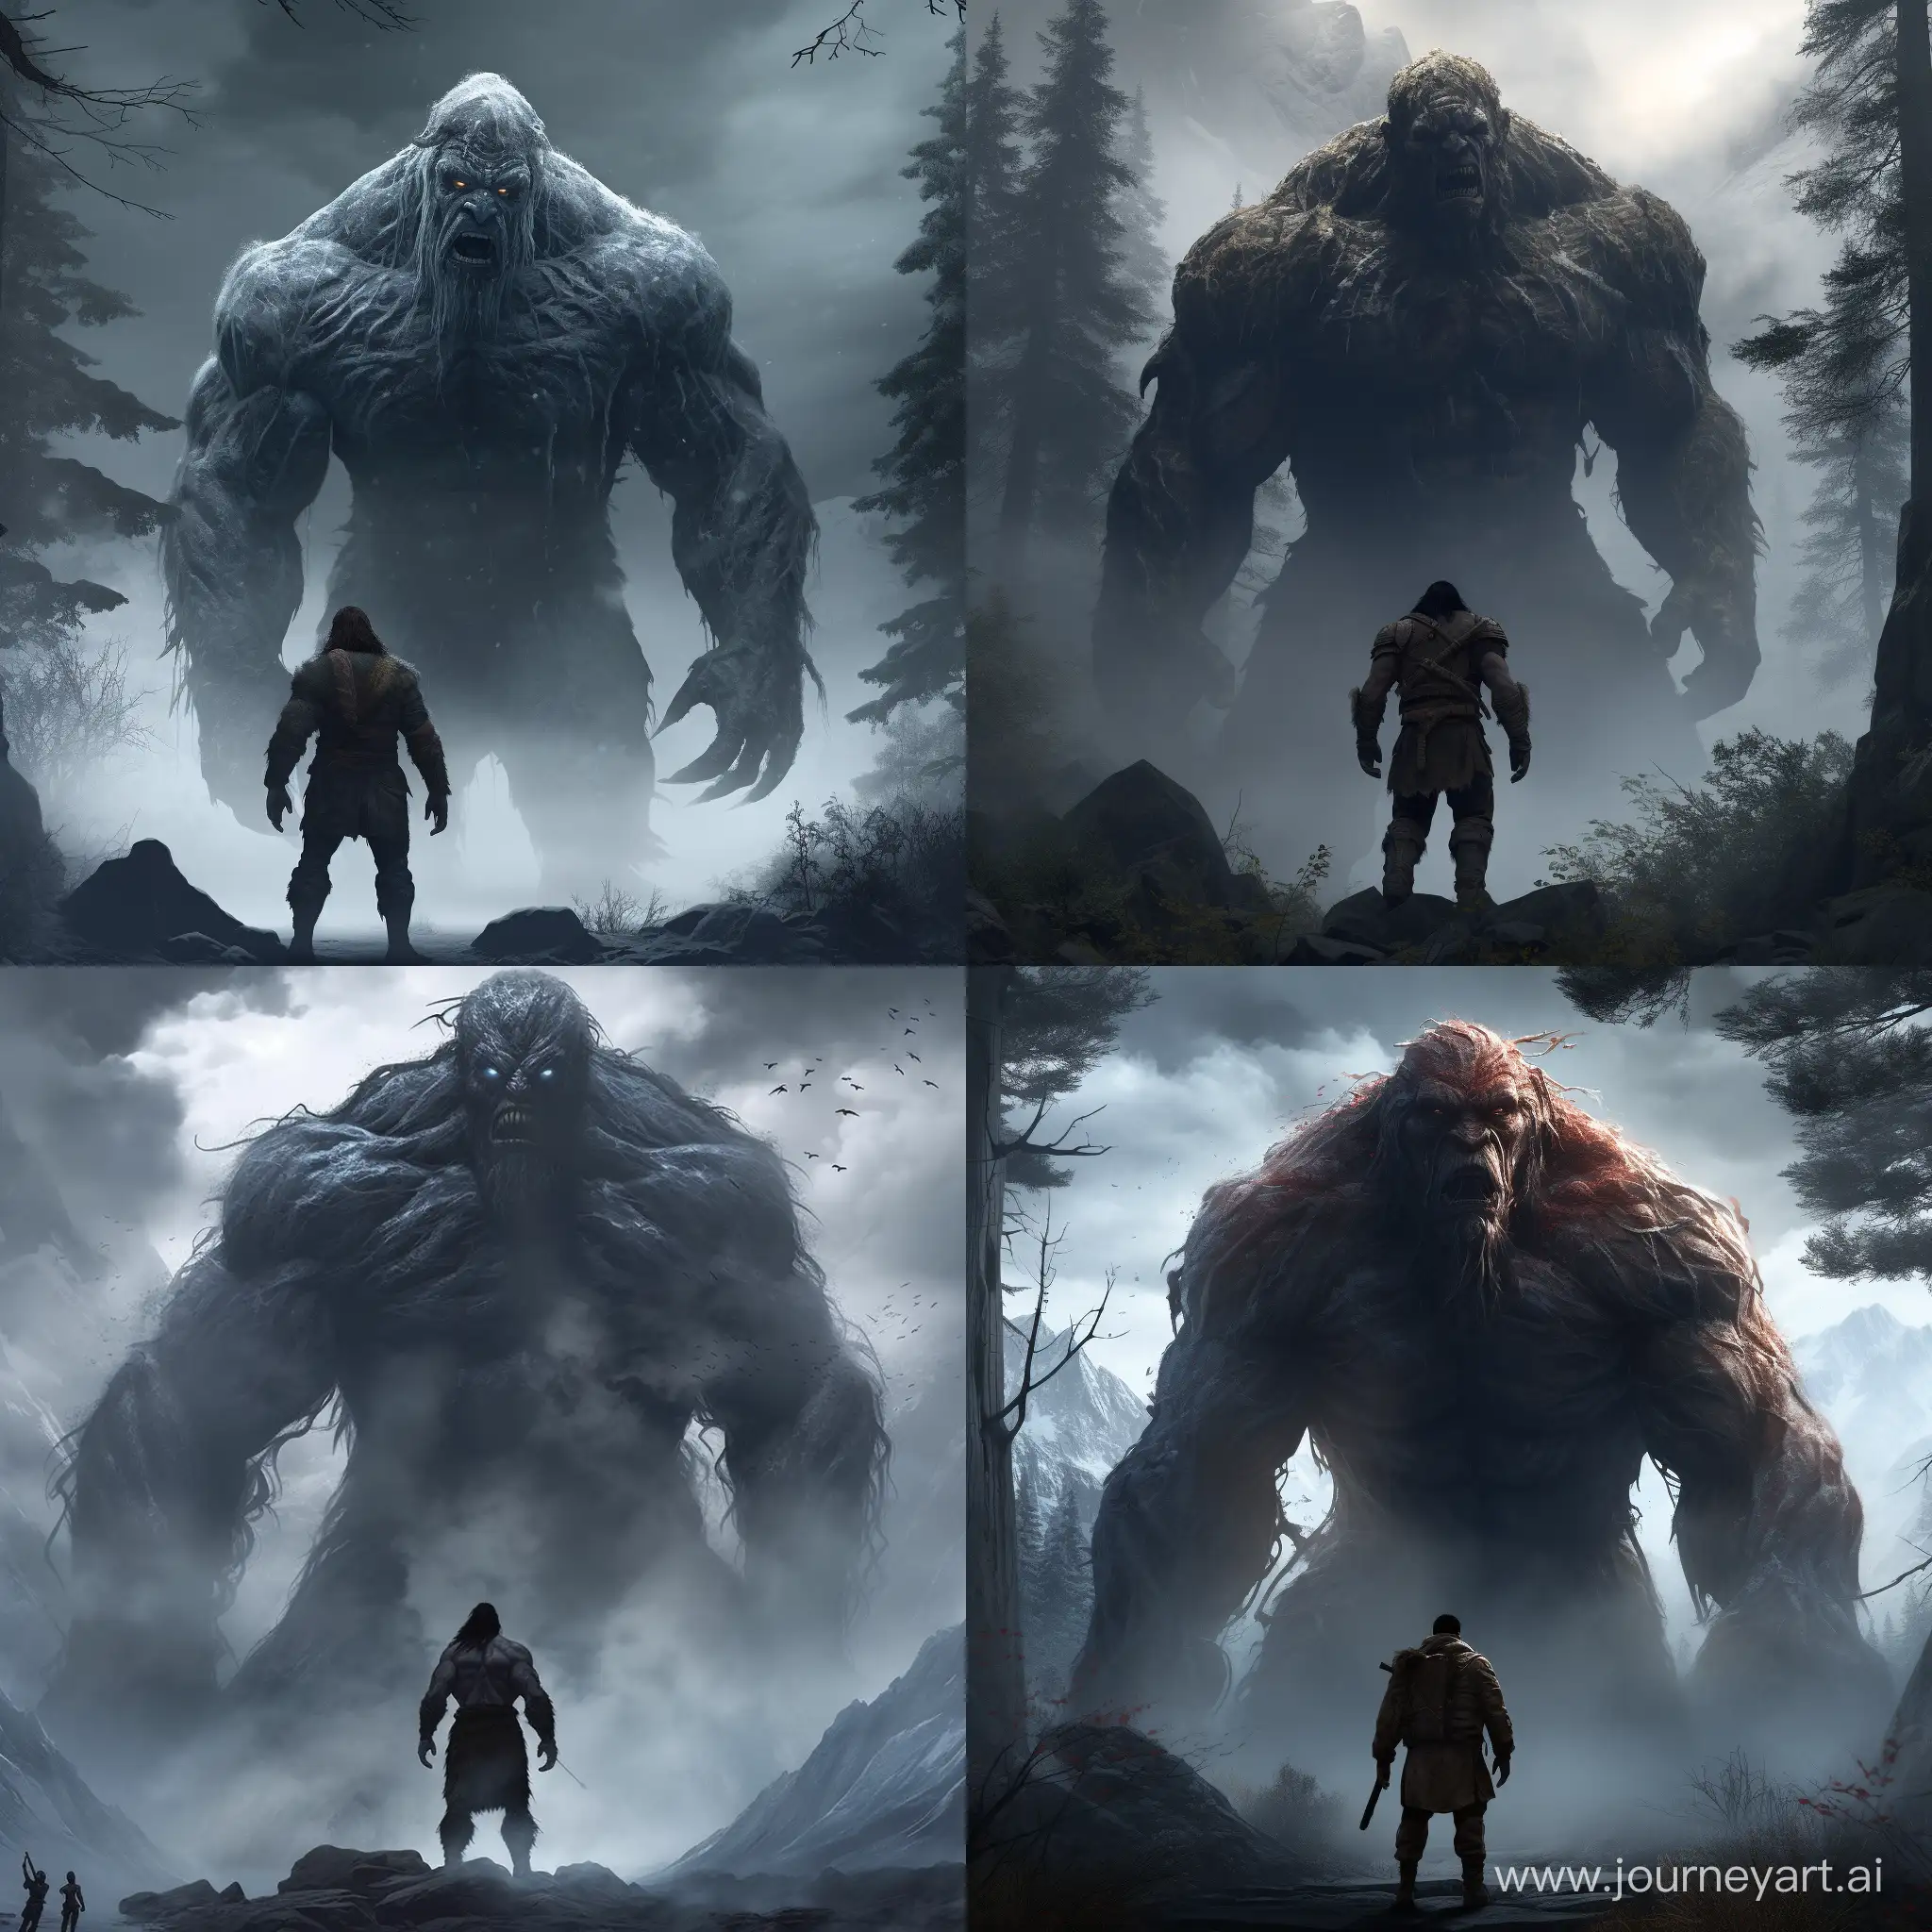 Ymir's Ominous Presence: Depict Ymir, the giant leader, as a colossal and imposing figure. Use imagery to convey the threat he posed to Asgard, prompting the gods to take drastic measures. 8k, hyperrealistic, cinematic